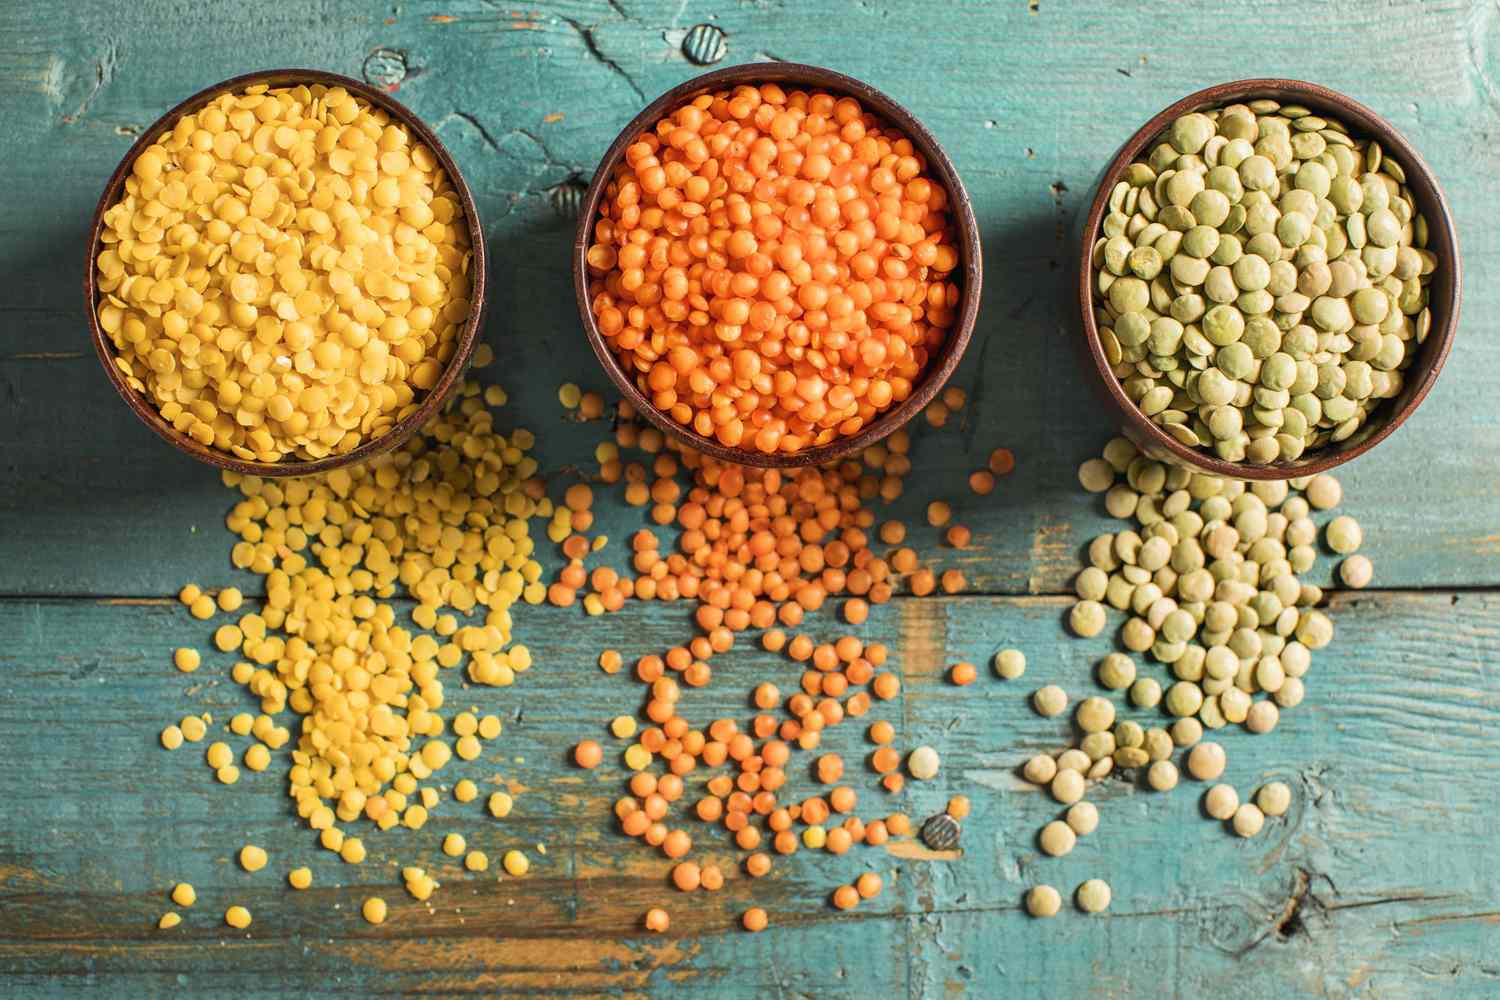 Red yellow green lentils high angle view